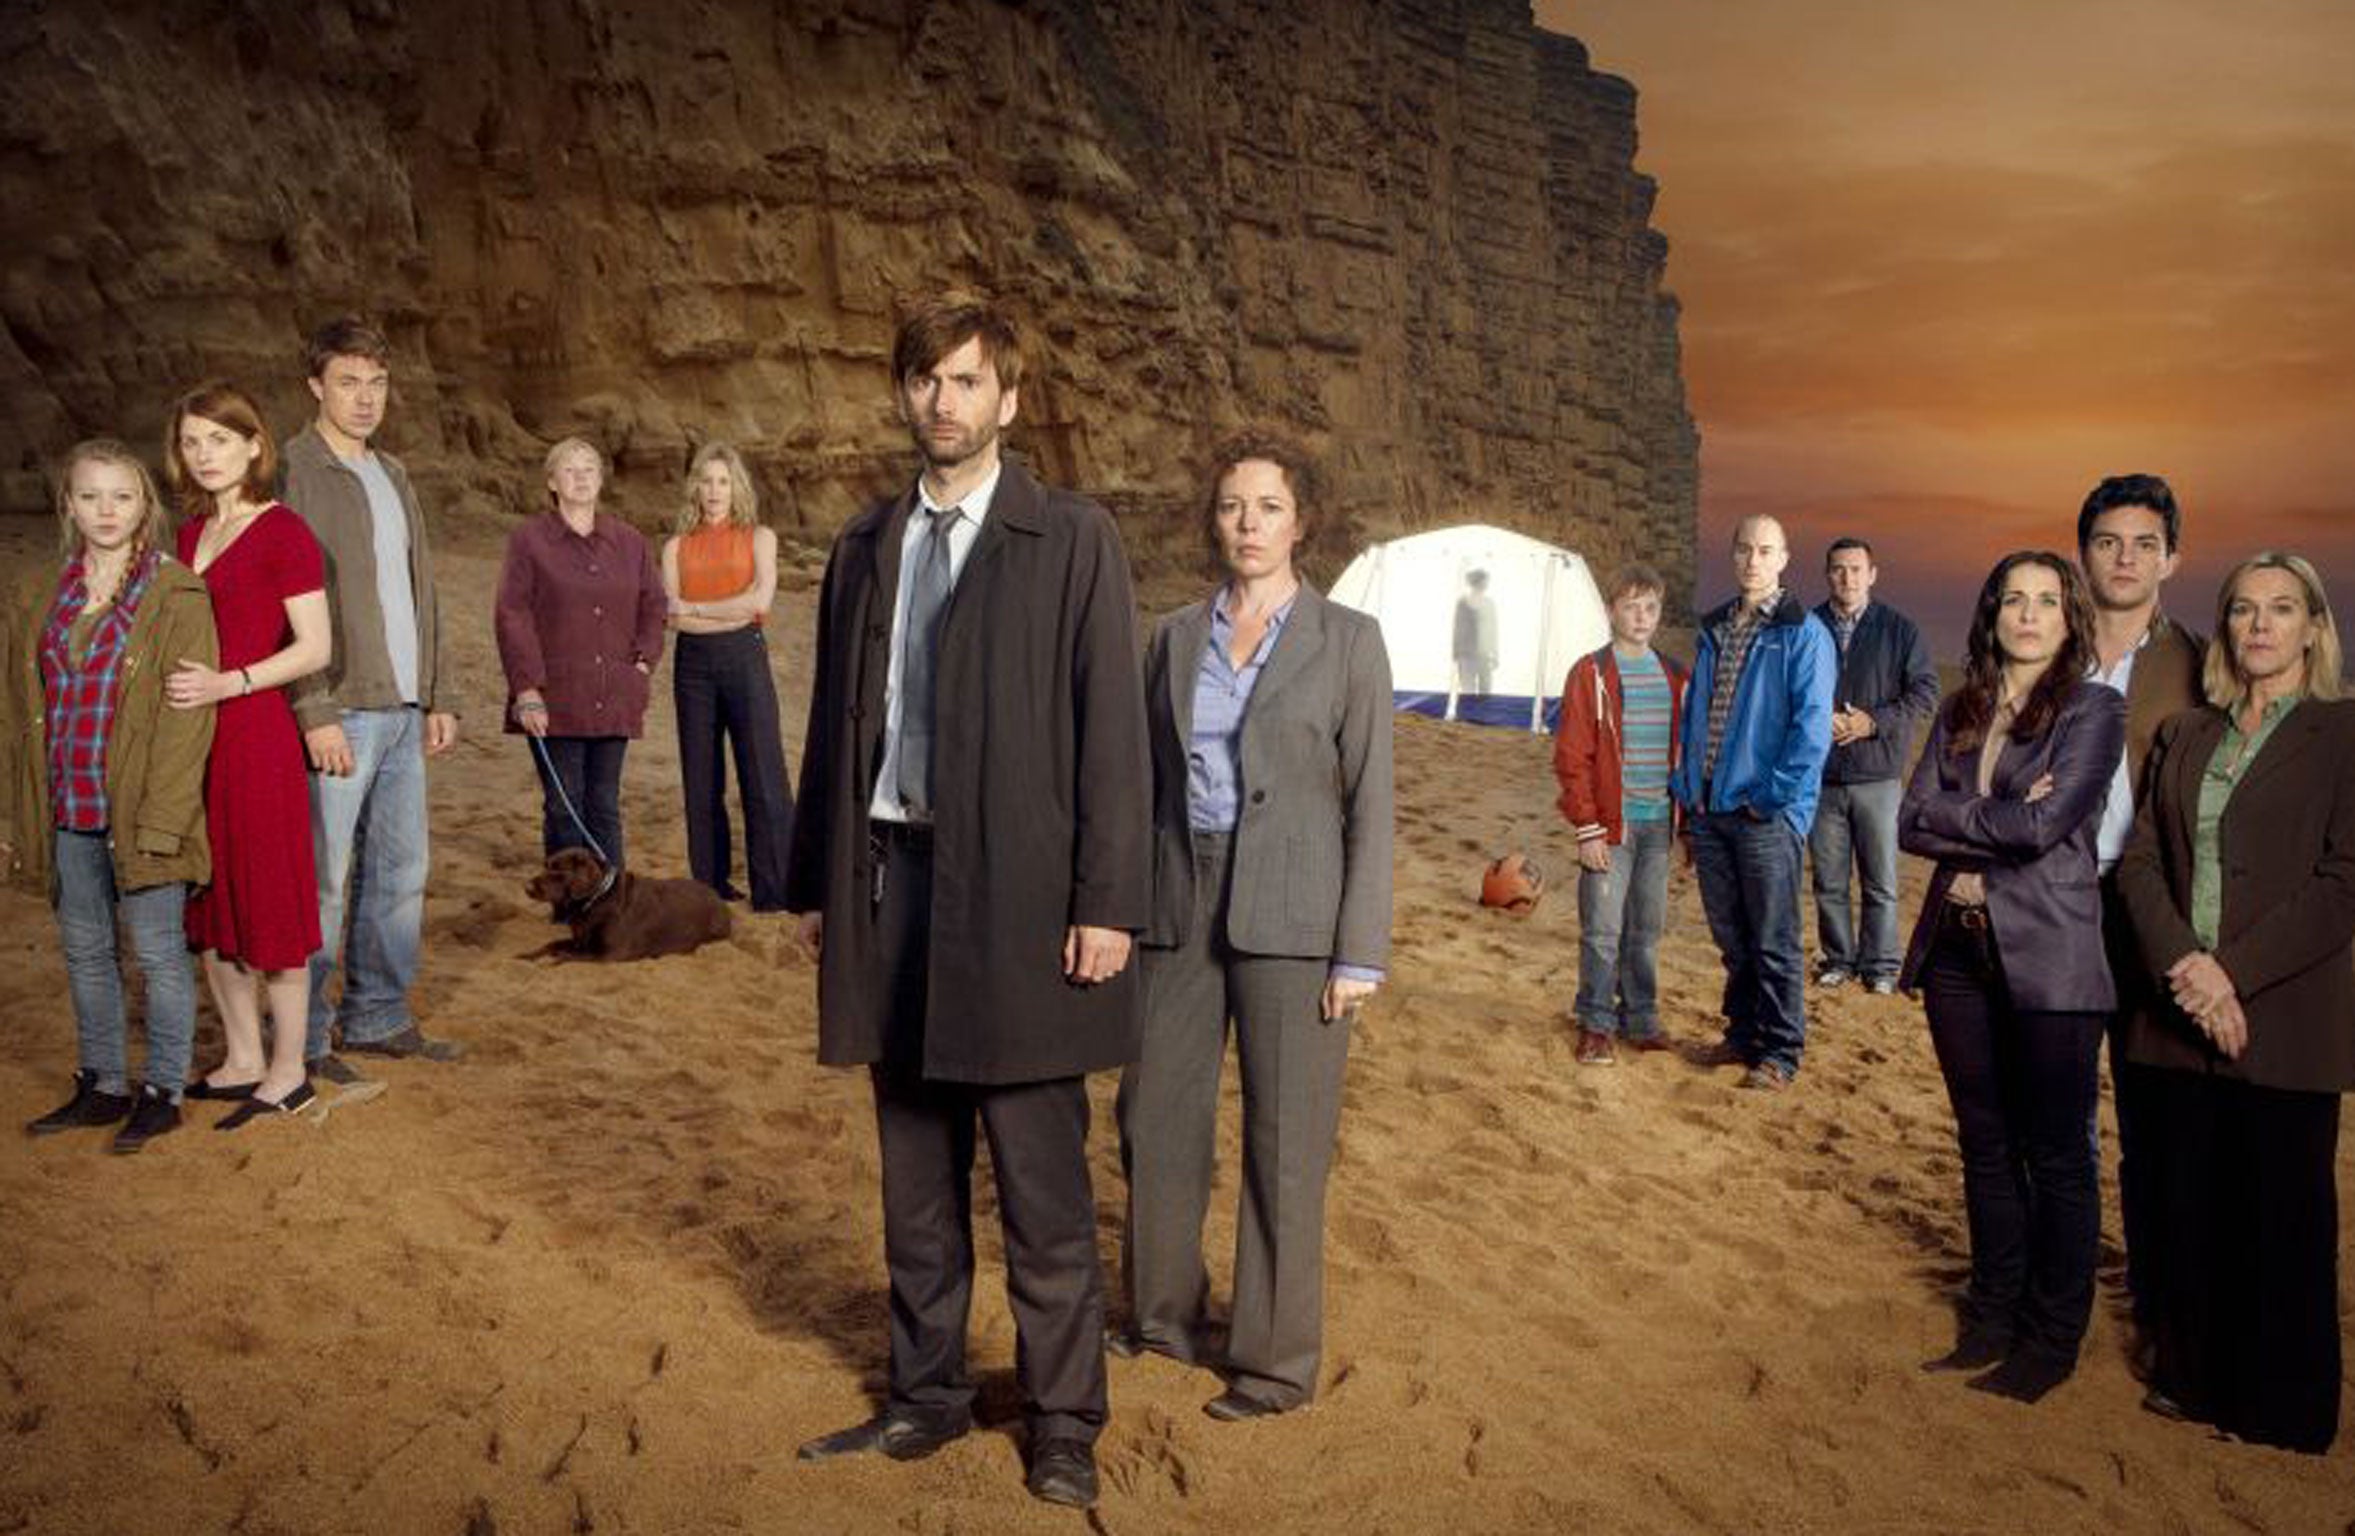 ITV has been named Channel of the Year in recognition of a strong period of programming, including hit drama series Broadchurch